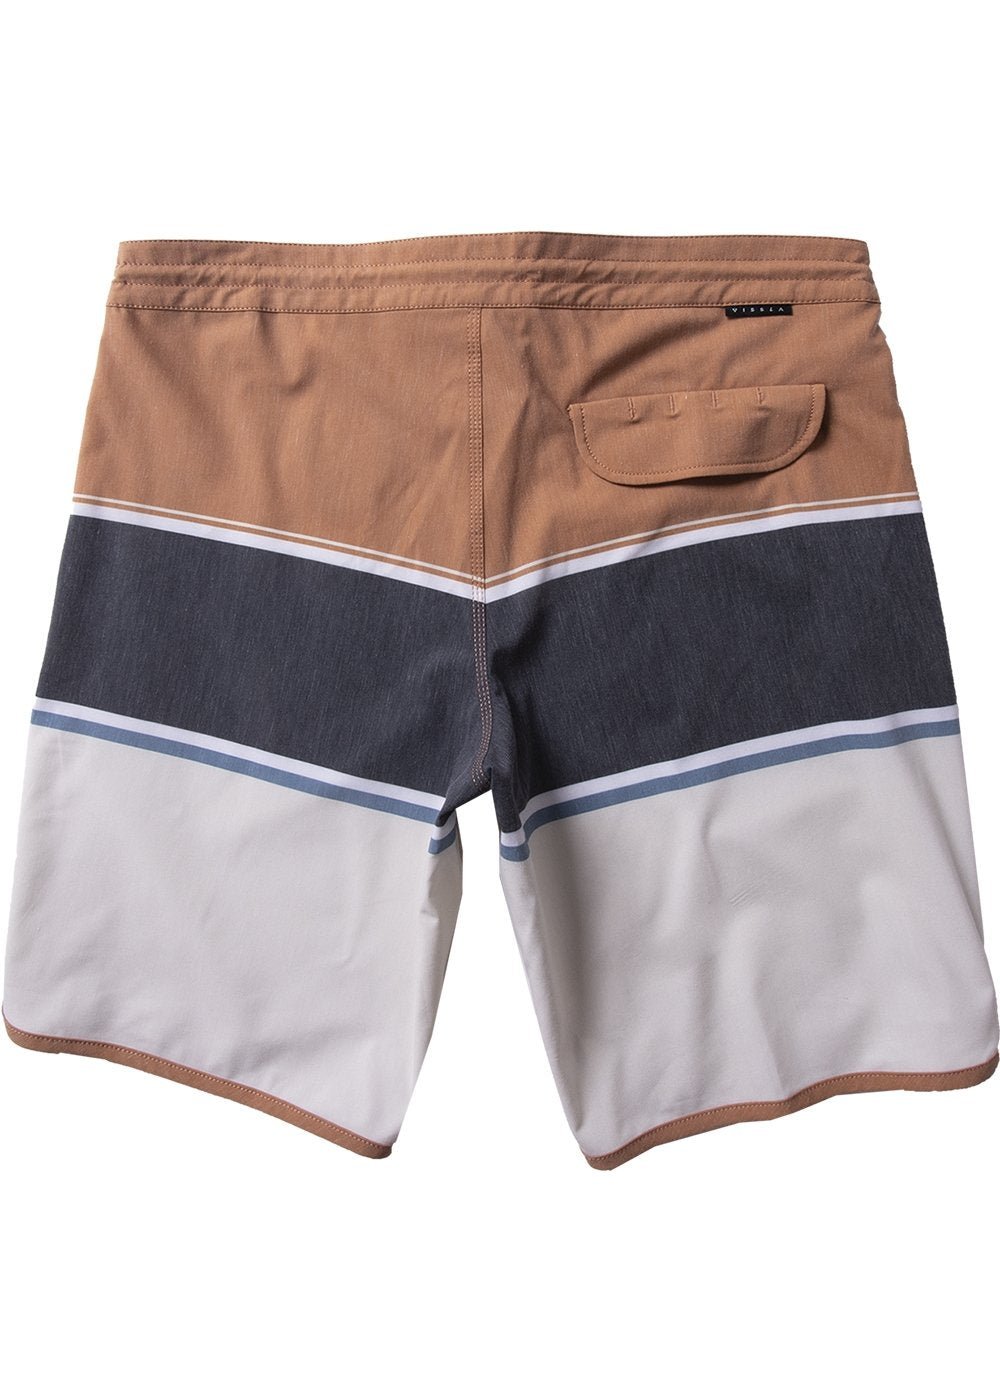 The Point 19.5" Boardshort-OXD - Stoke Outlets